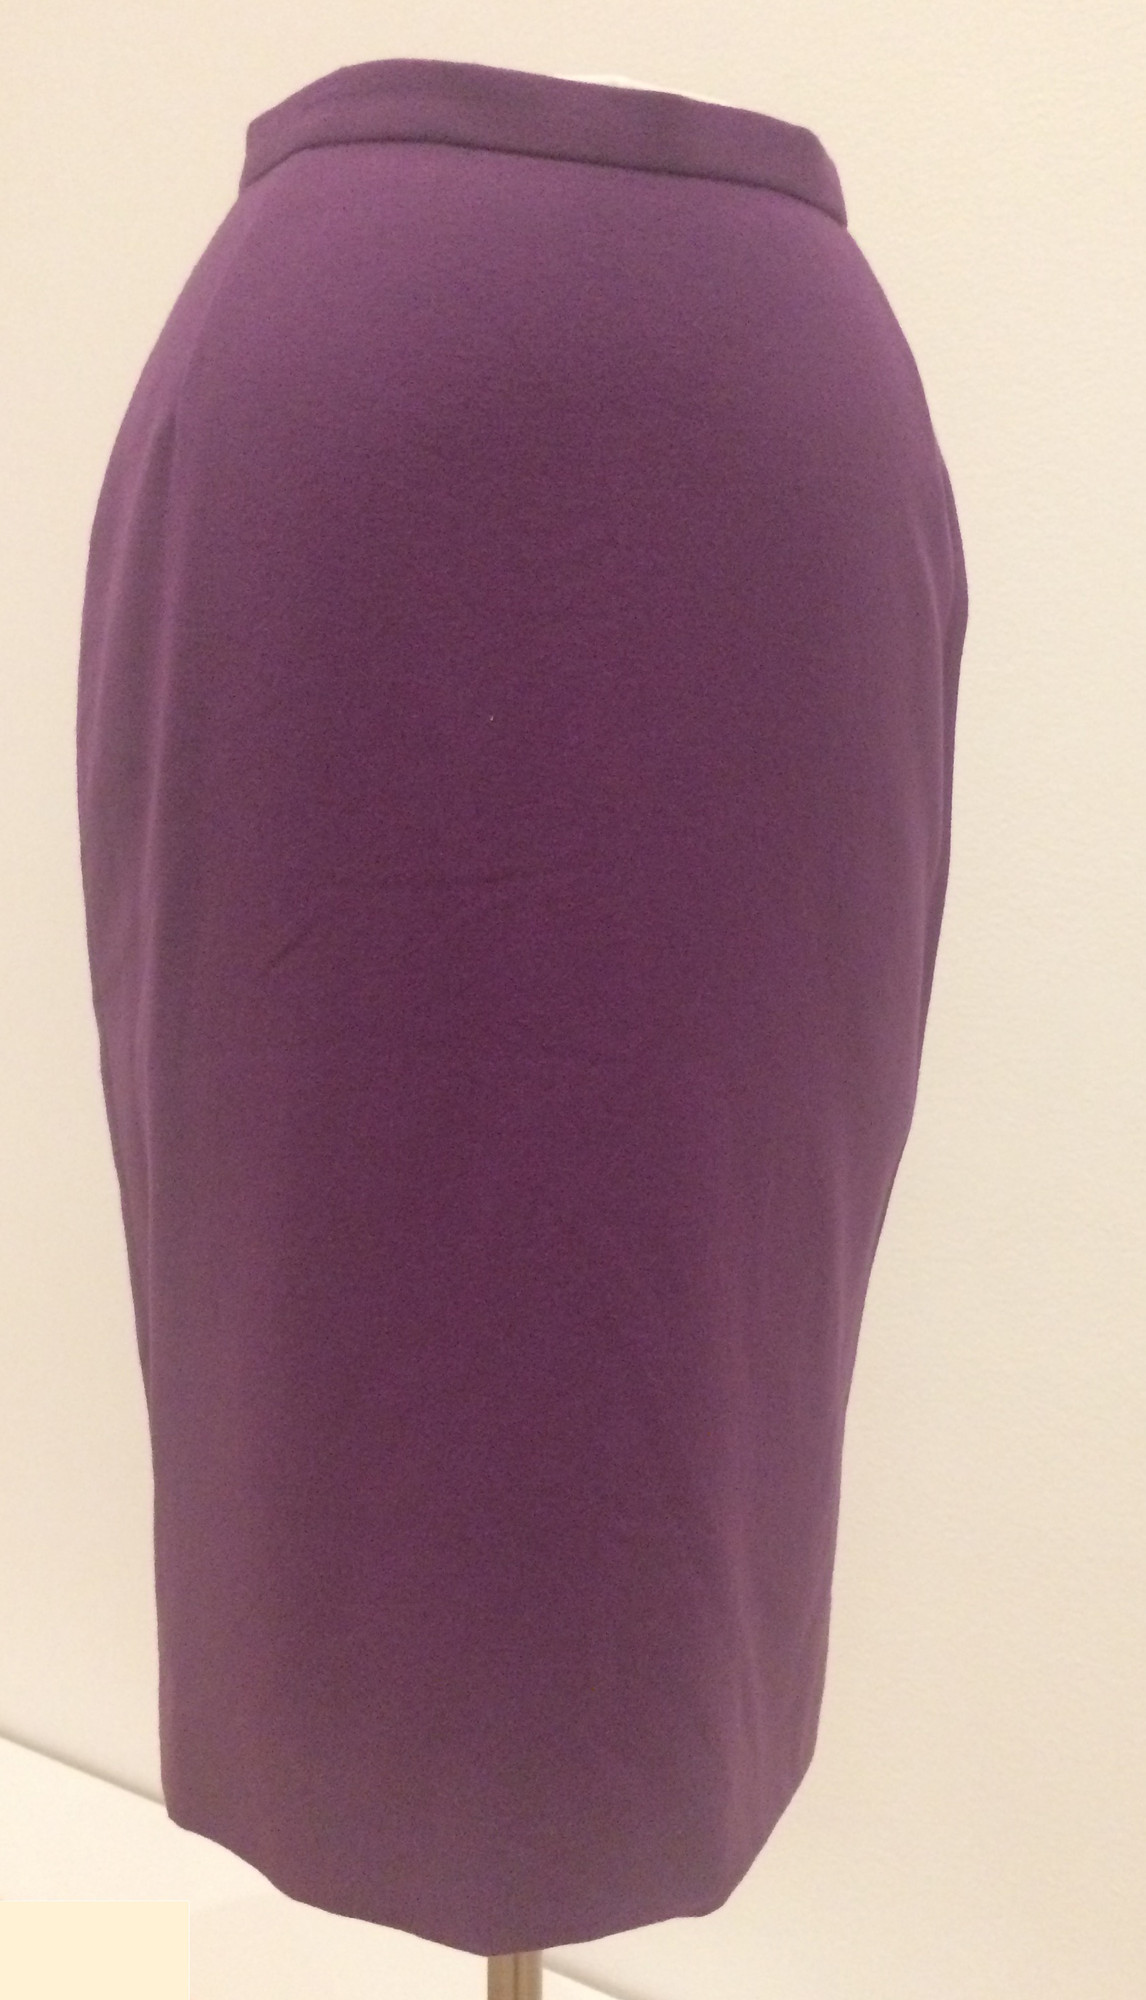 Janie Bryant (American, born 1974). Janie Bryant, Inc. (American, founded 2006). Pencil Skirt, 2007-15). Wool blend. Lent by Lionsgate Television. Image courtesy Lionsgate Television